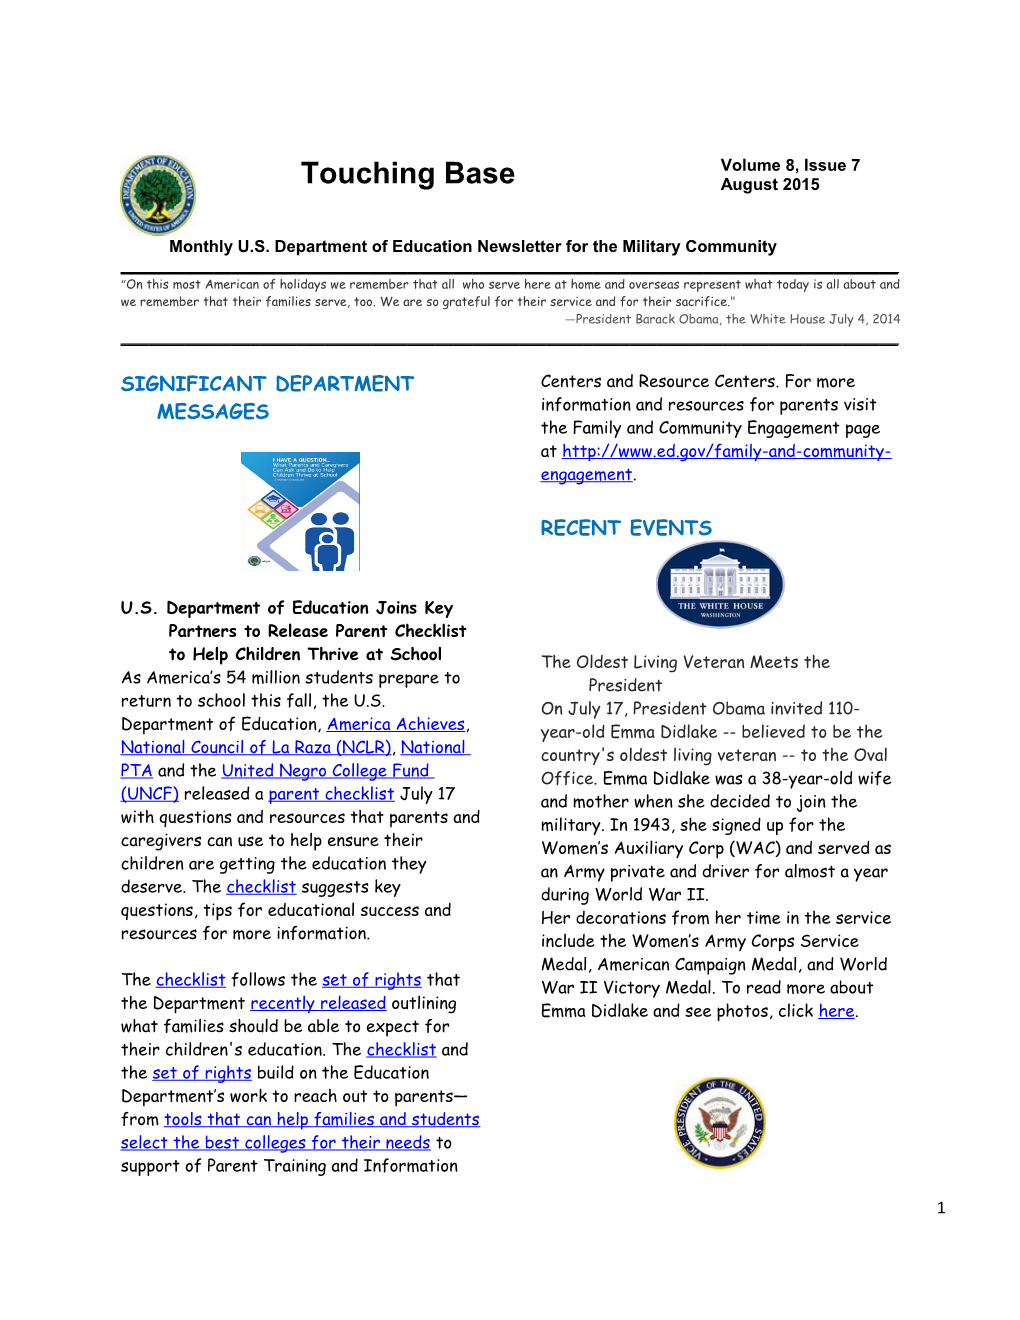 Monthly U.S. Department of Education Newsletter for the Military Community